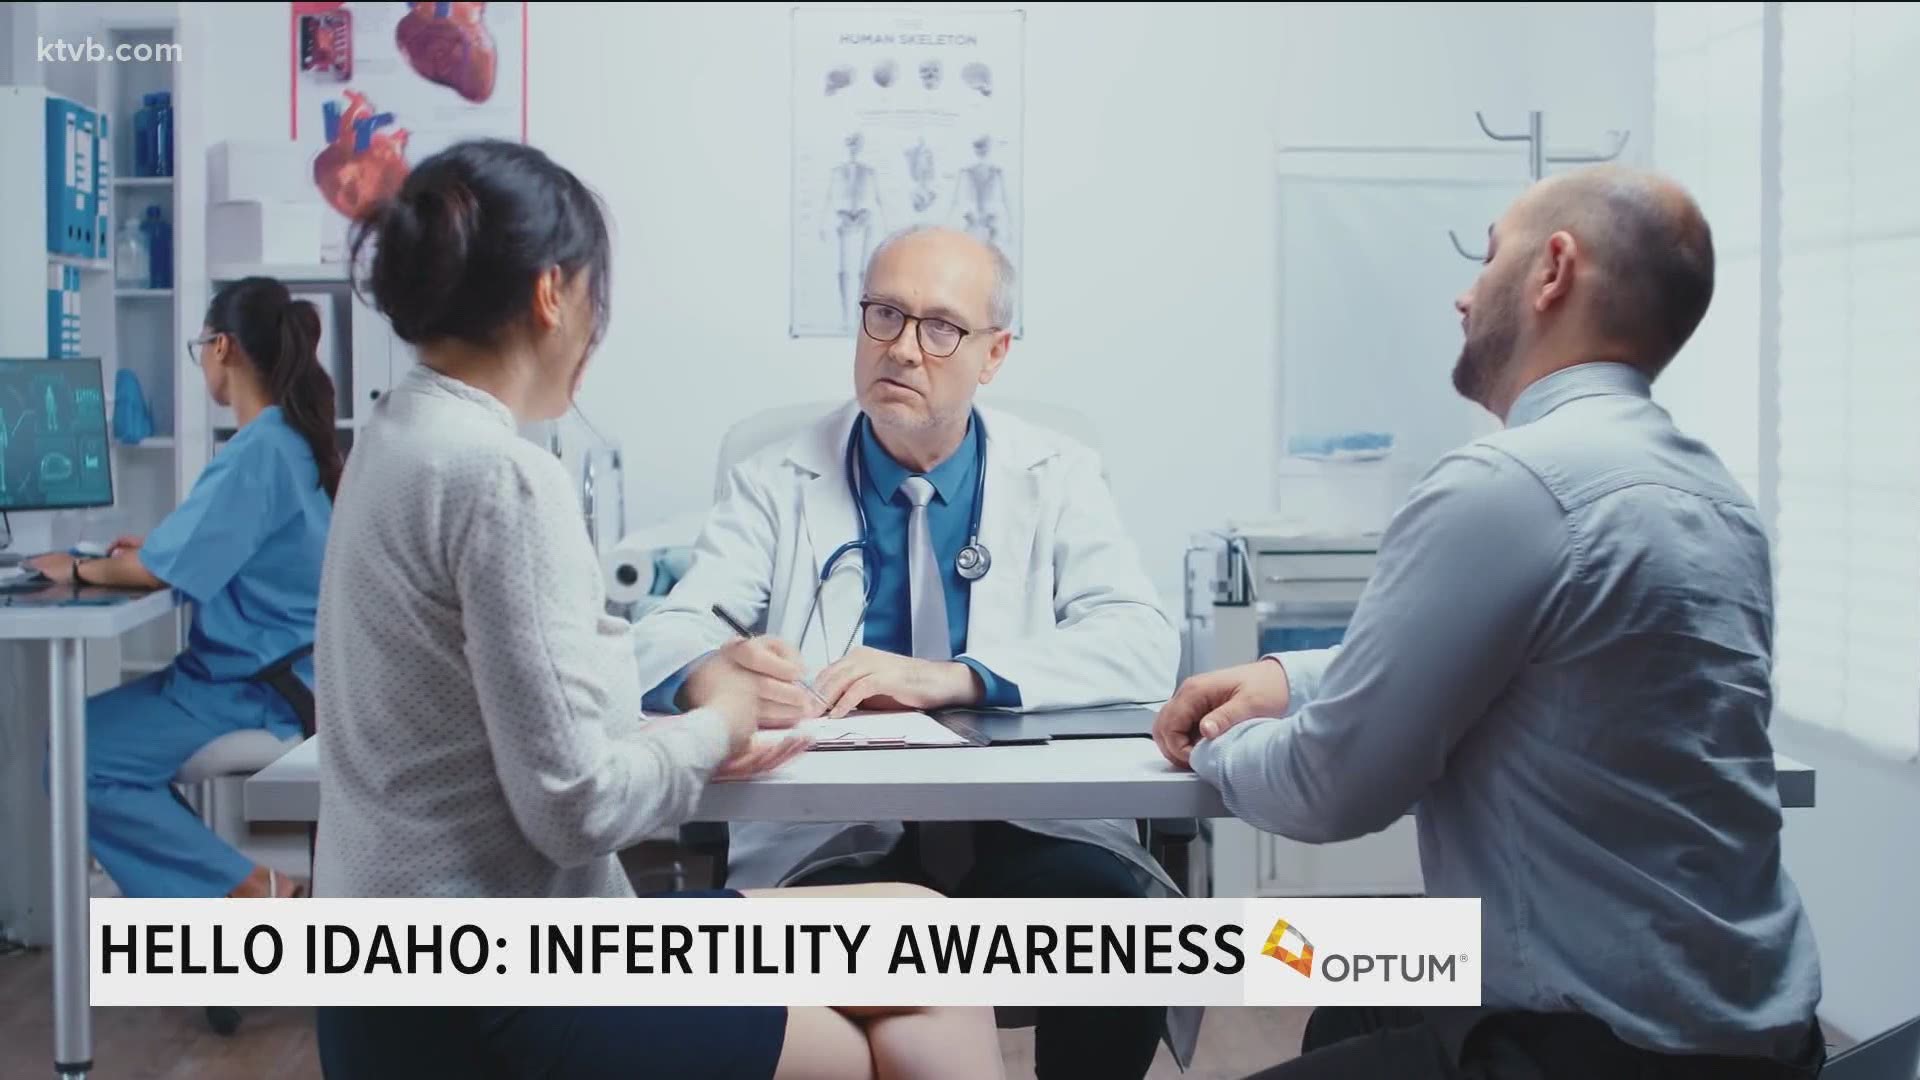 Karen Schafer is hoping to raise awareness about infertility by working with a non-profit aimed at supporting couples struggling to start a family.